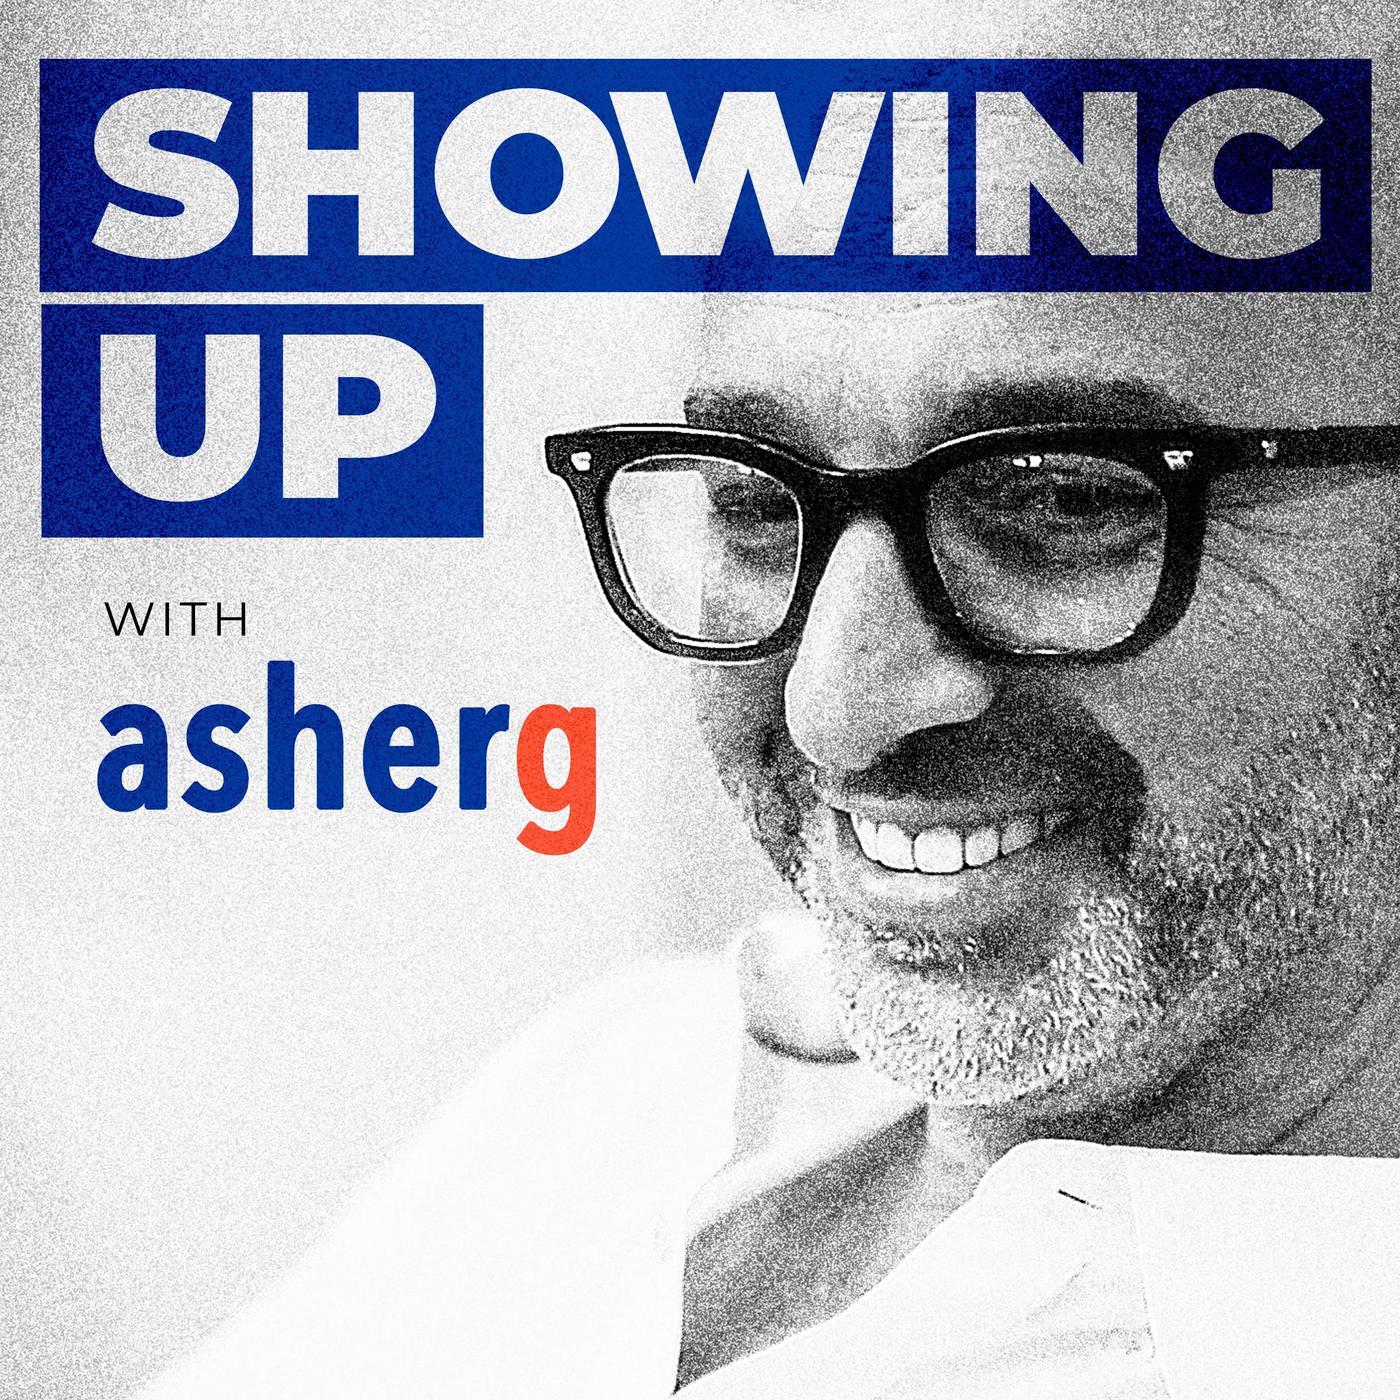 showing-up-with-asher-gottesman-m3jEe7tc-1R-De2UXyPA-O3.1400x1400